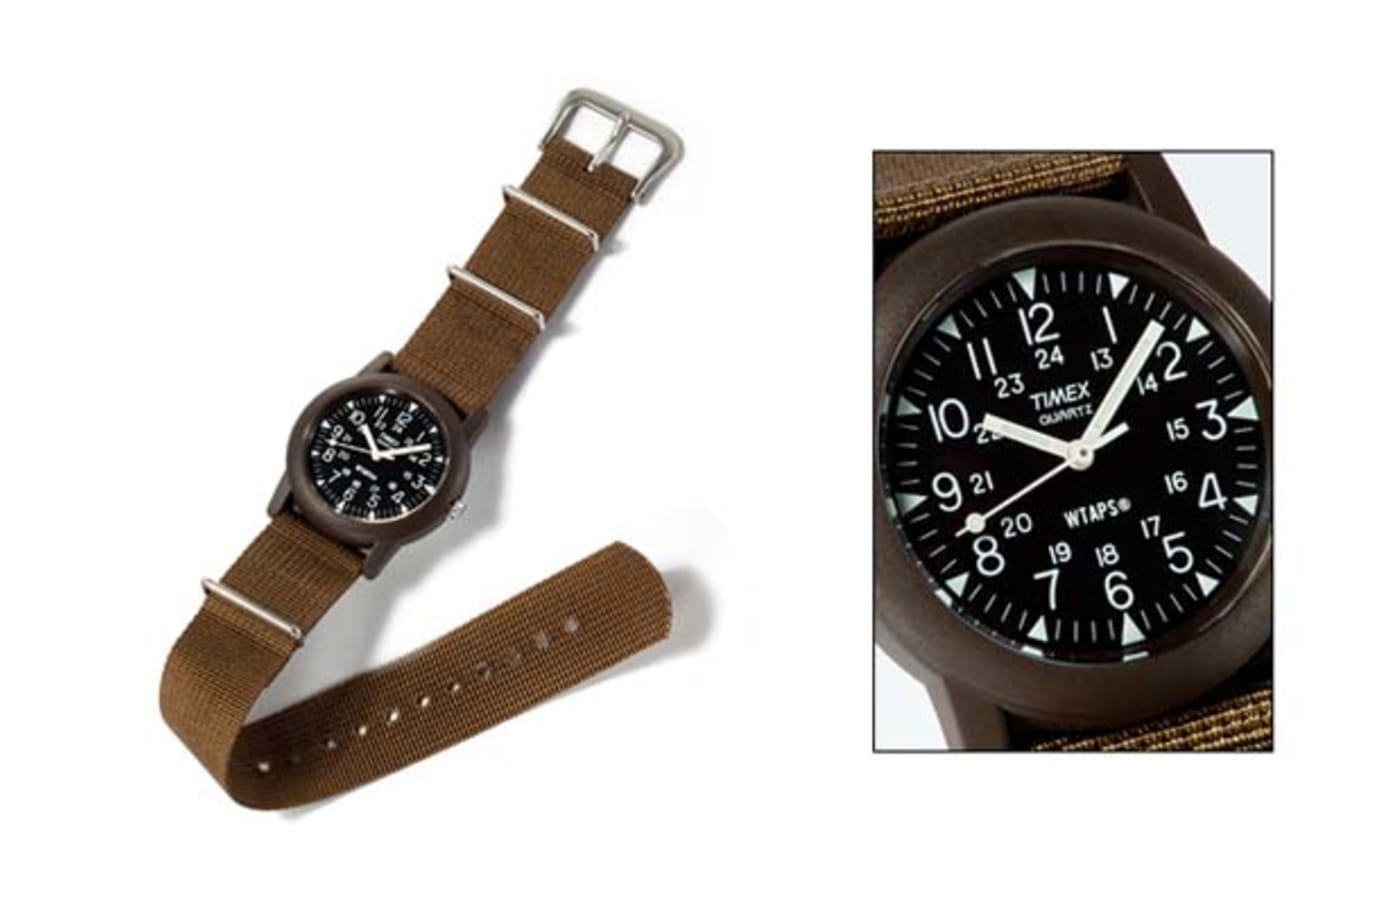 WTAPS Collaborates With Timex on a Military-Inspired Watch 